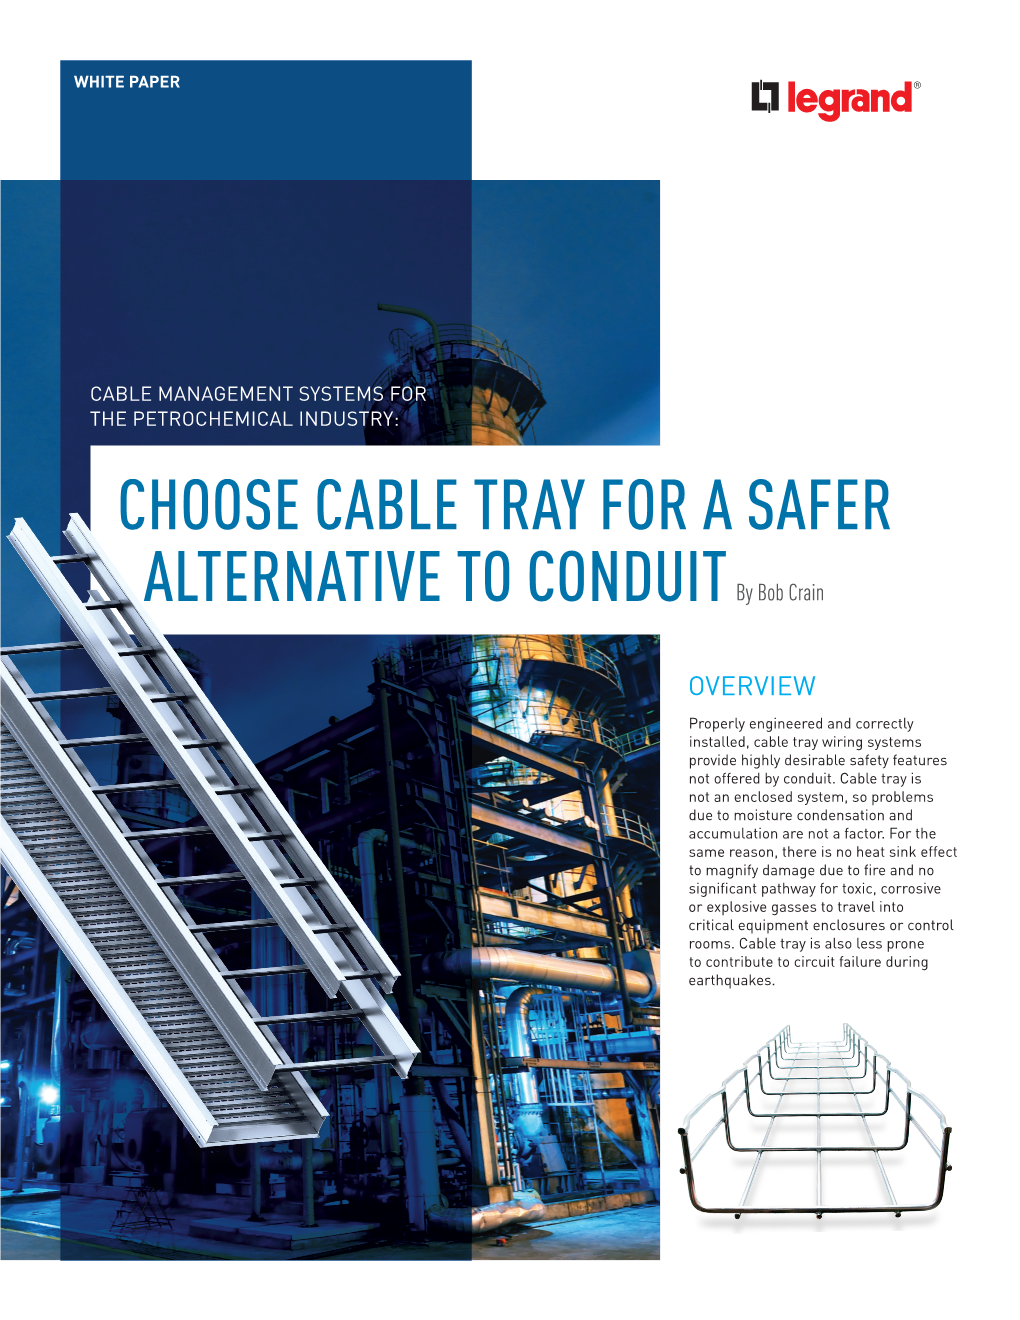 Choose Cable Tray for a Safer Alternative To